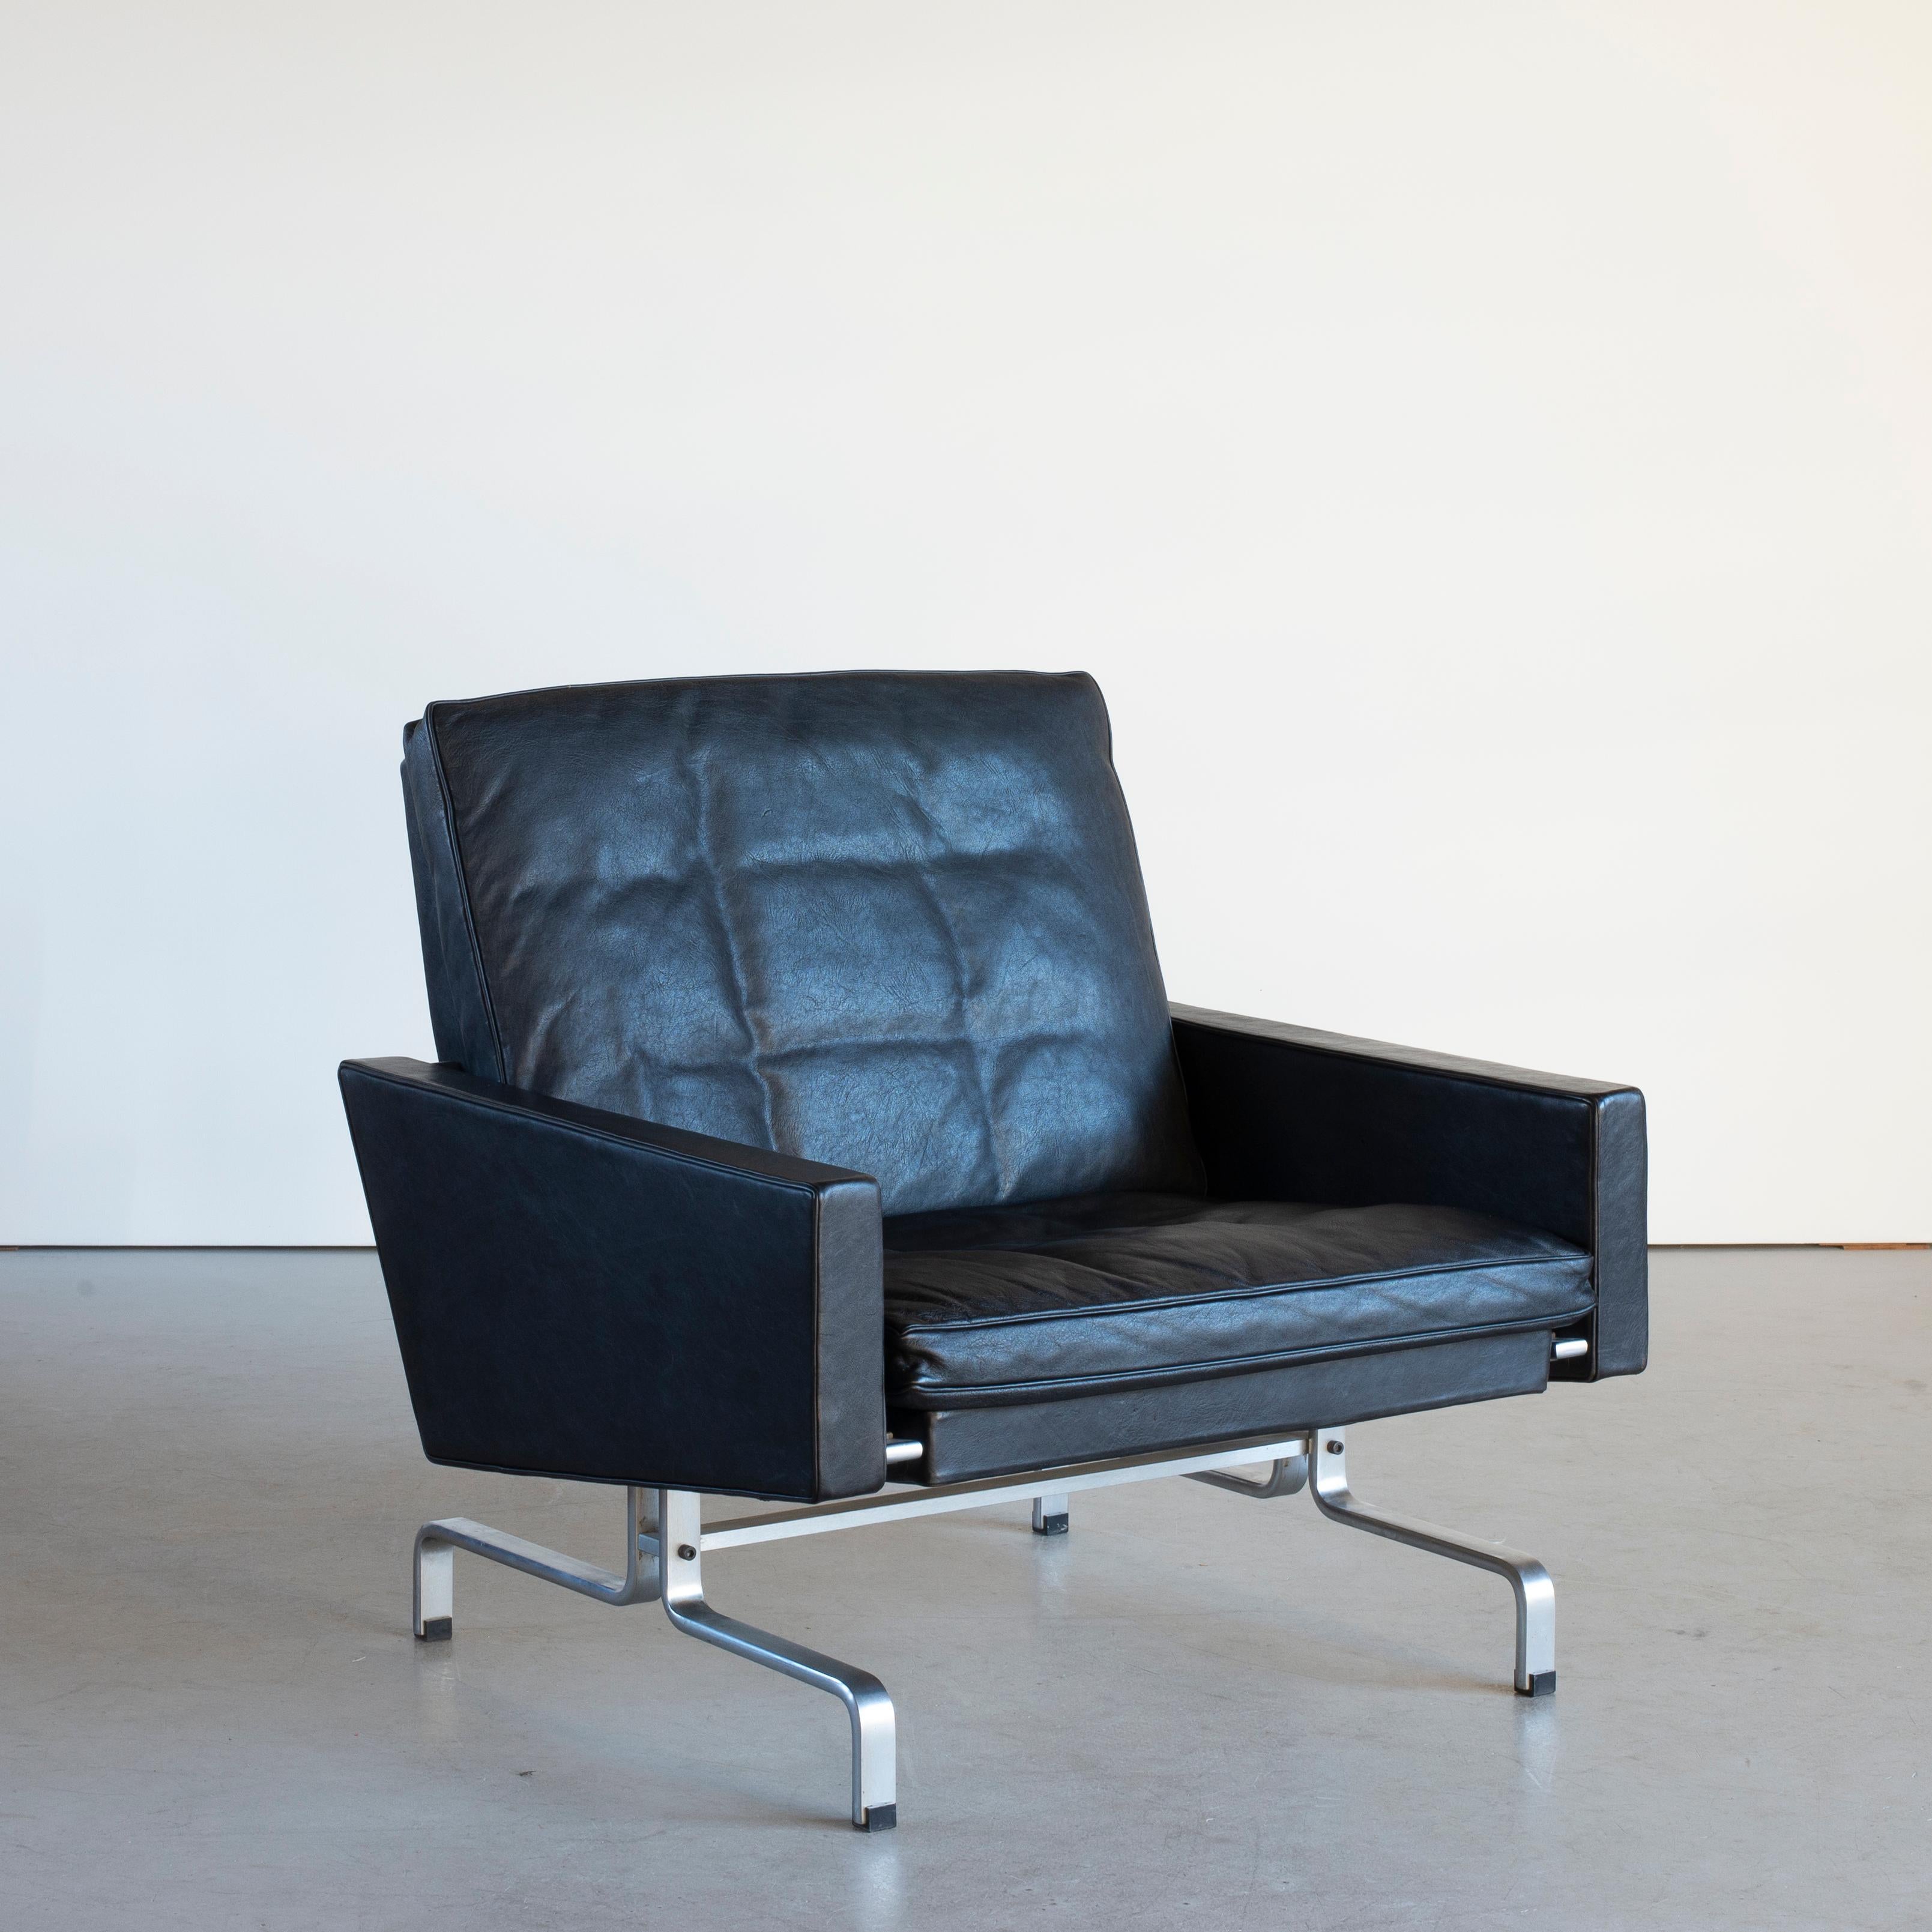 Poul Kjaerholm PK31 easy chair. Dull chromium-plated steel, black colored oxhide, loose down cushions. Executed by E. Kold Christensen, Denmark.